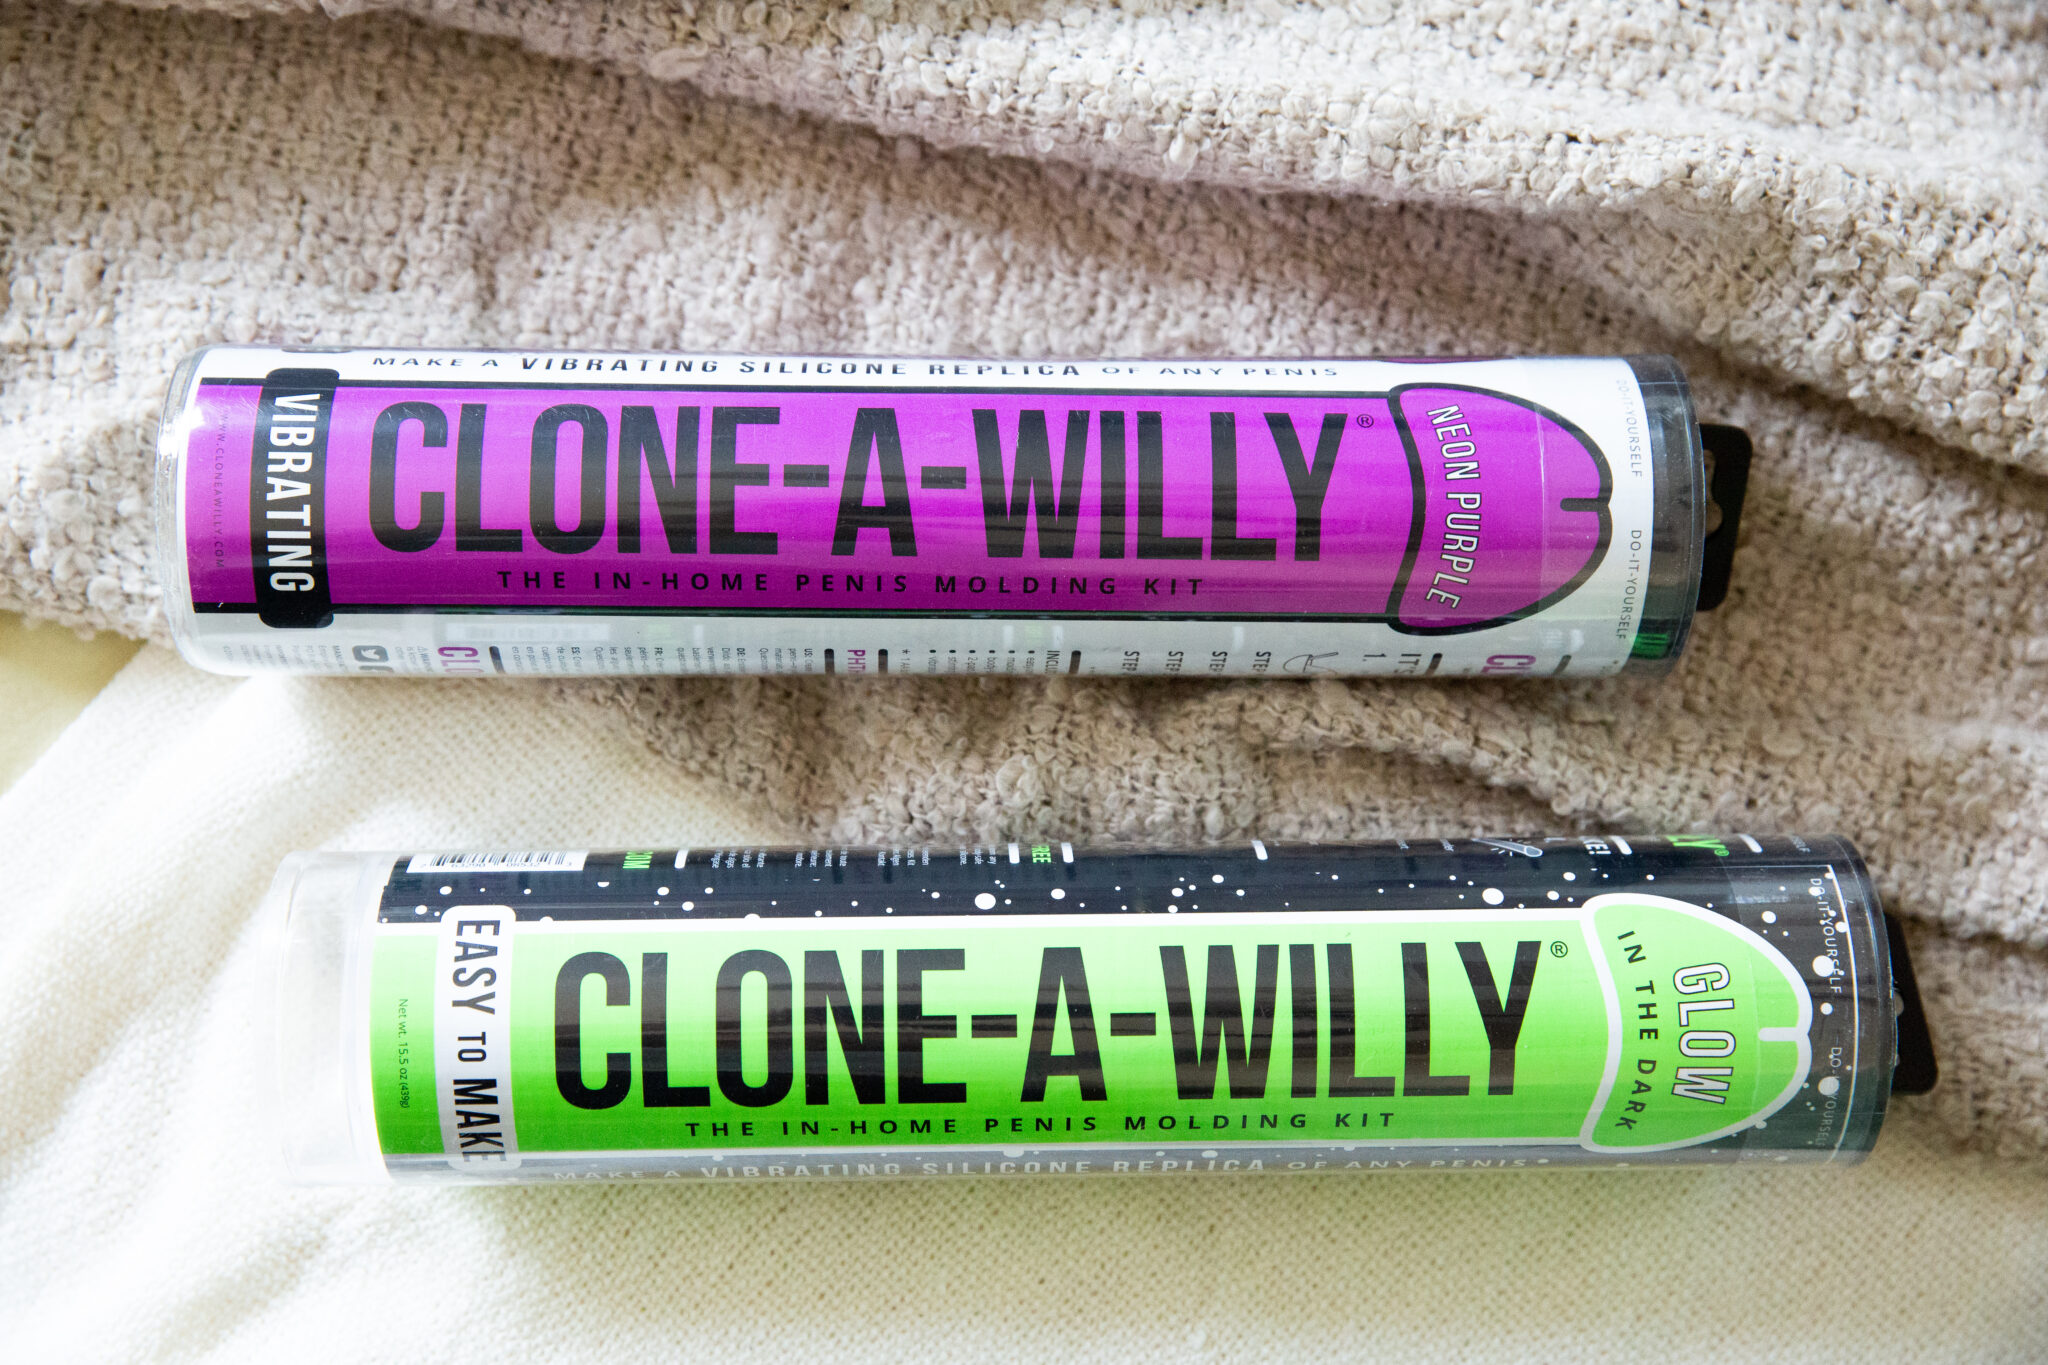 The Clone-A-Willy kits in neon green and purple.